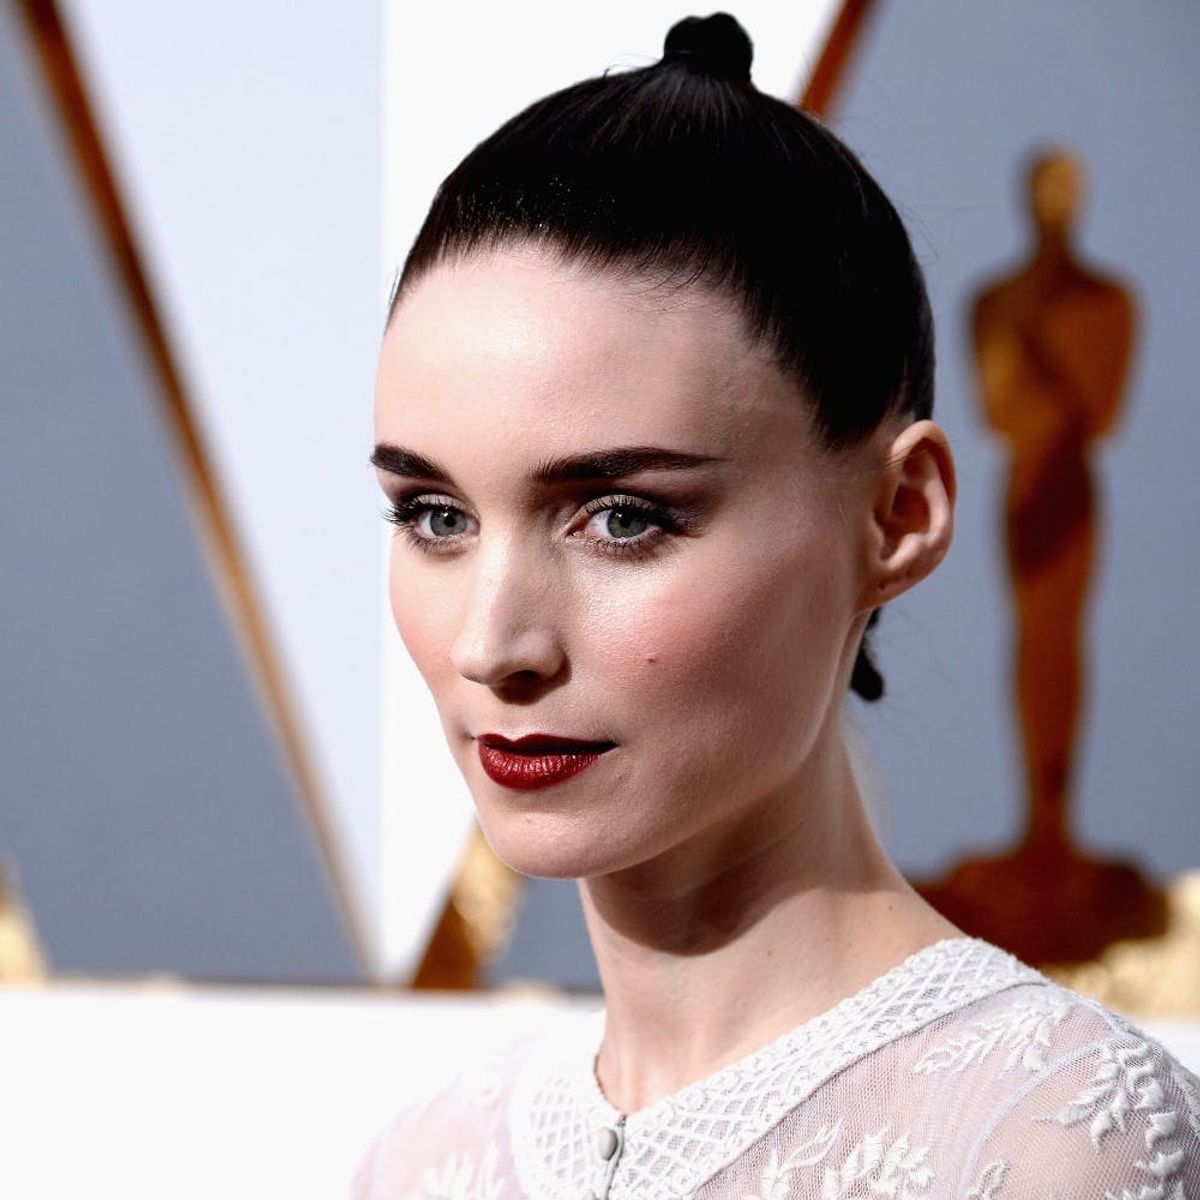 You Have to See Rooney Mara’s Platinum Hair to Believe It